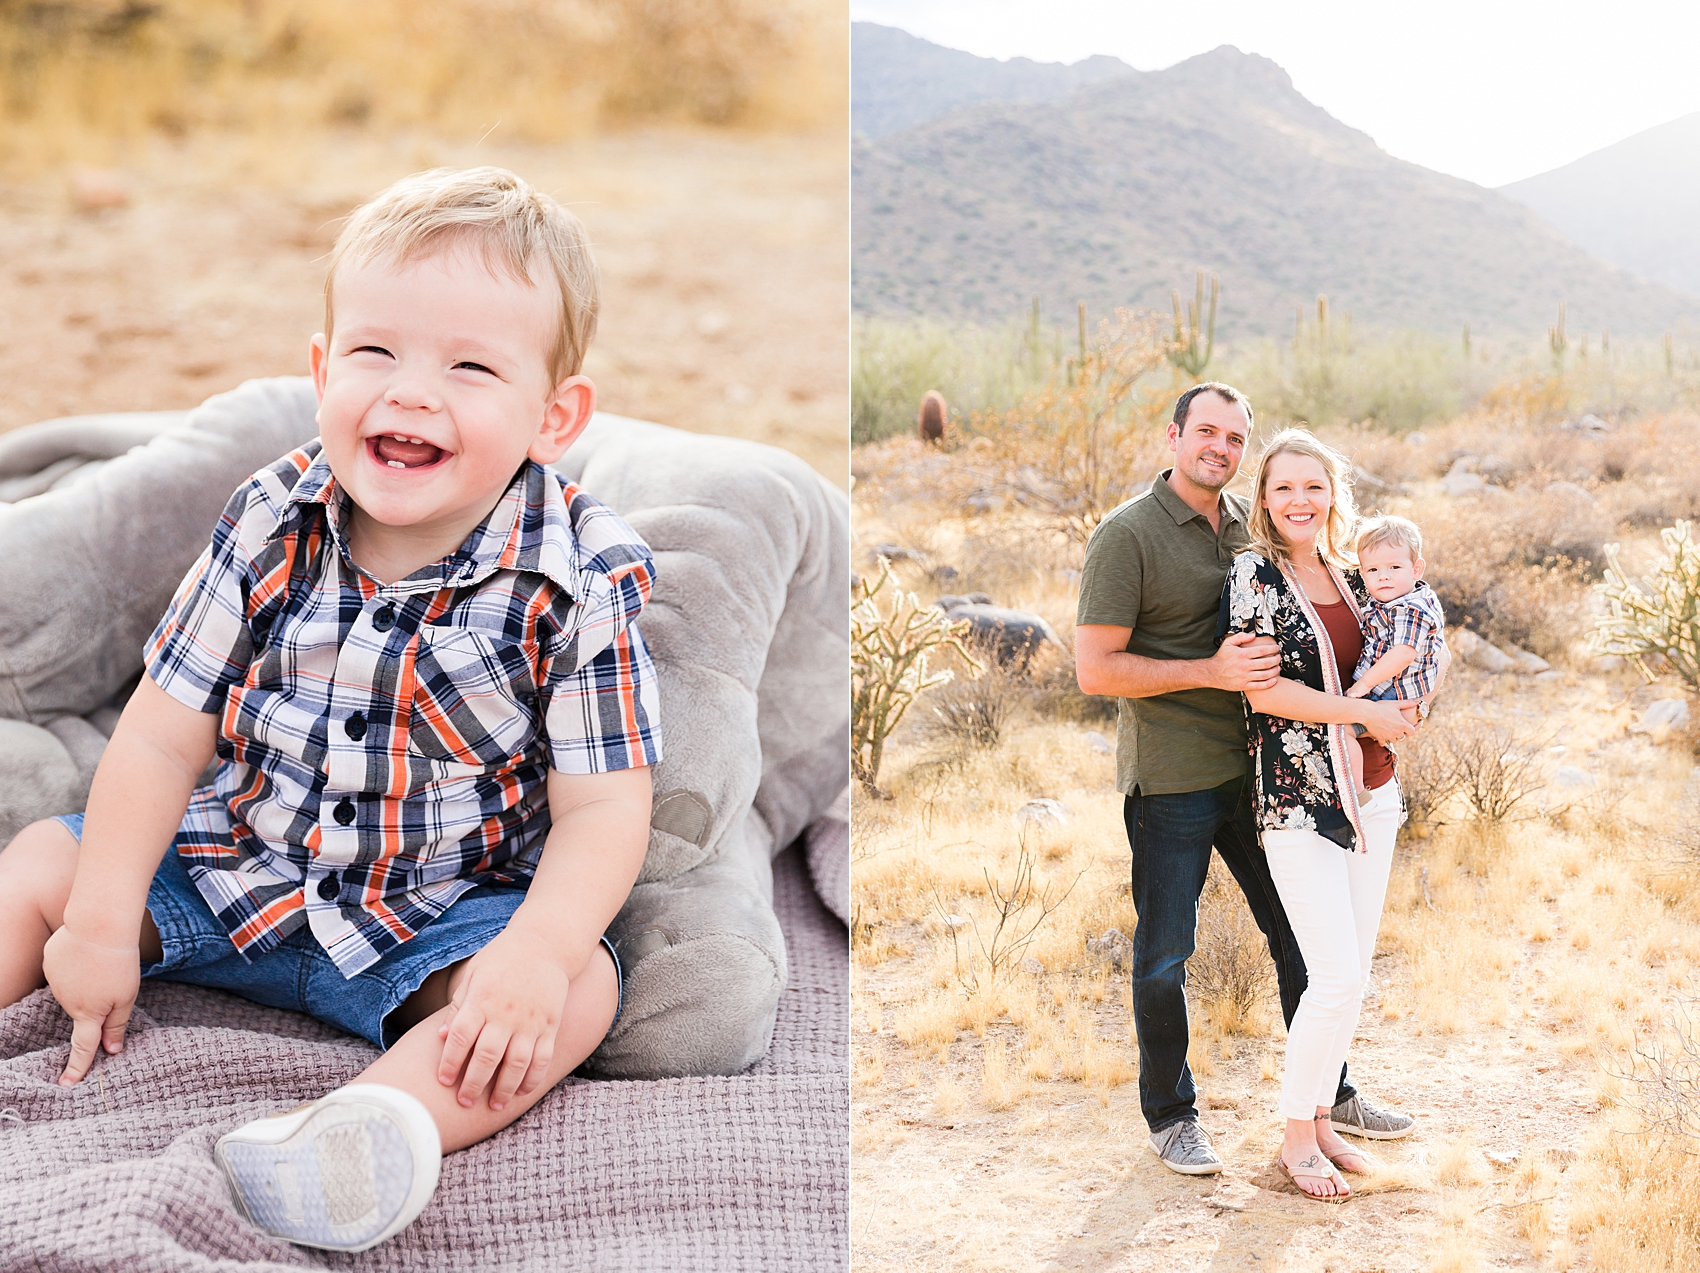 Leah Hope Photography | Scottsdale Phoenix Arizona | White Tank Mountains | Desert Landscape Scenery | Family Pictures | Extended | Baby 